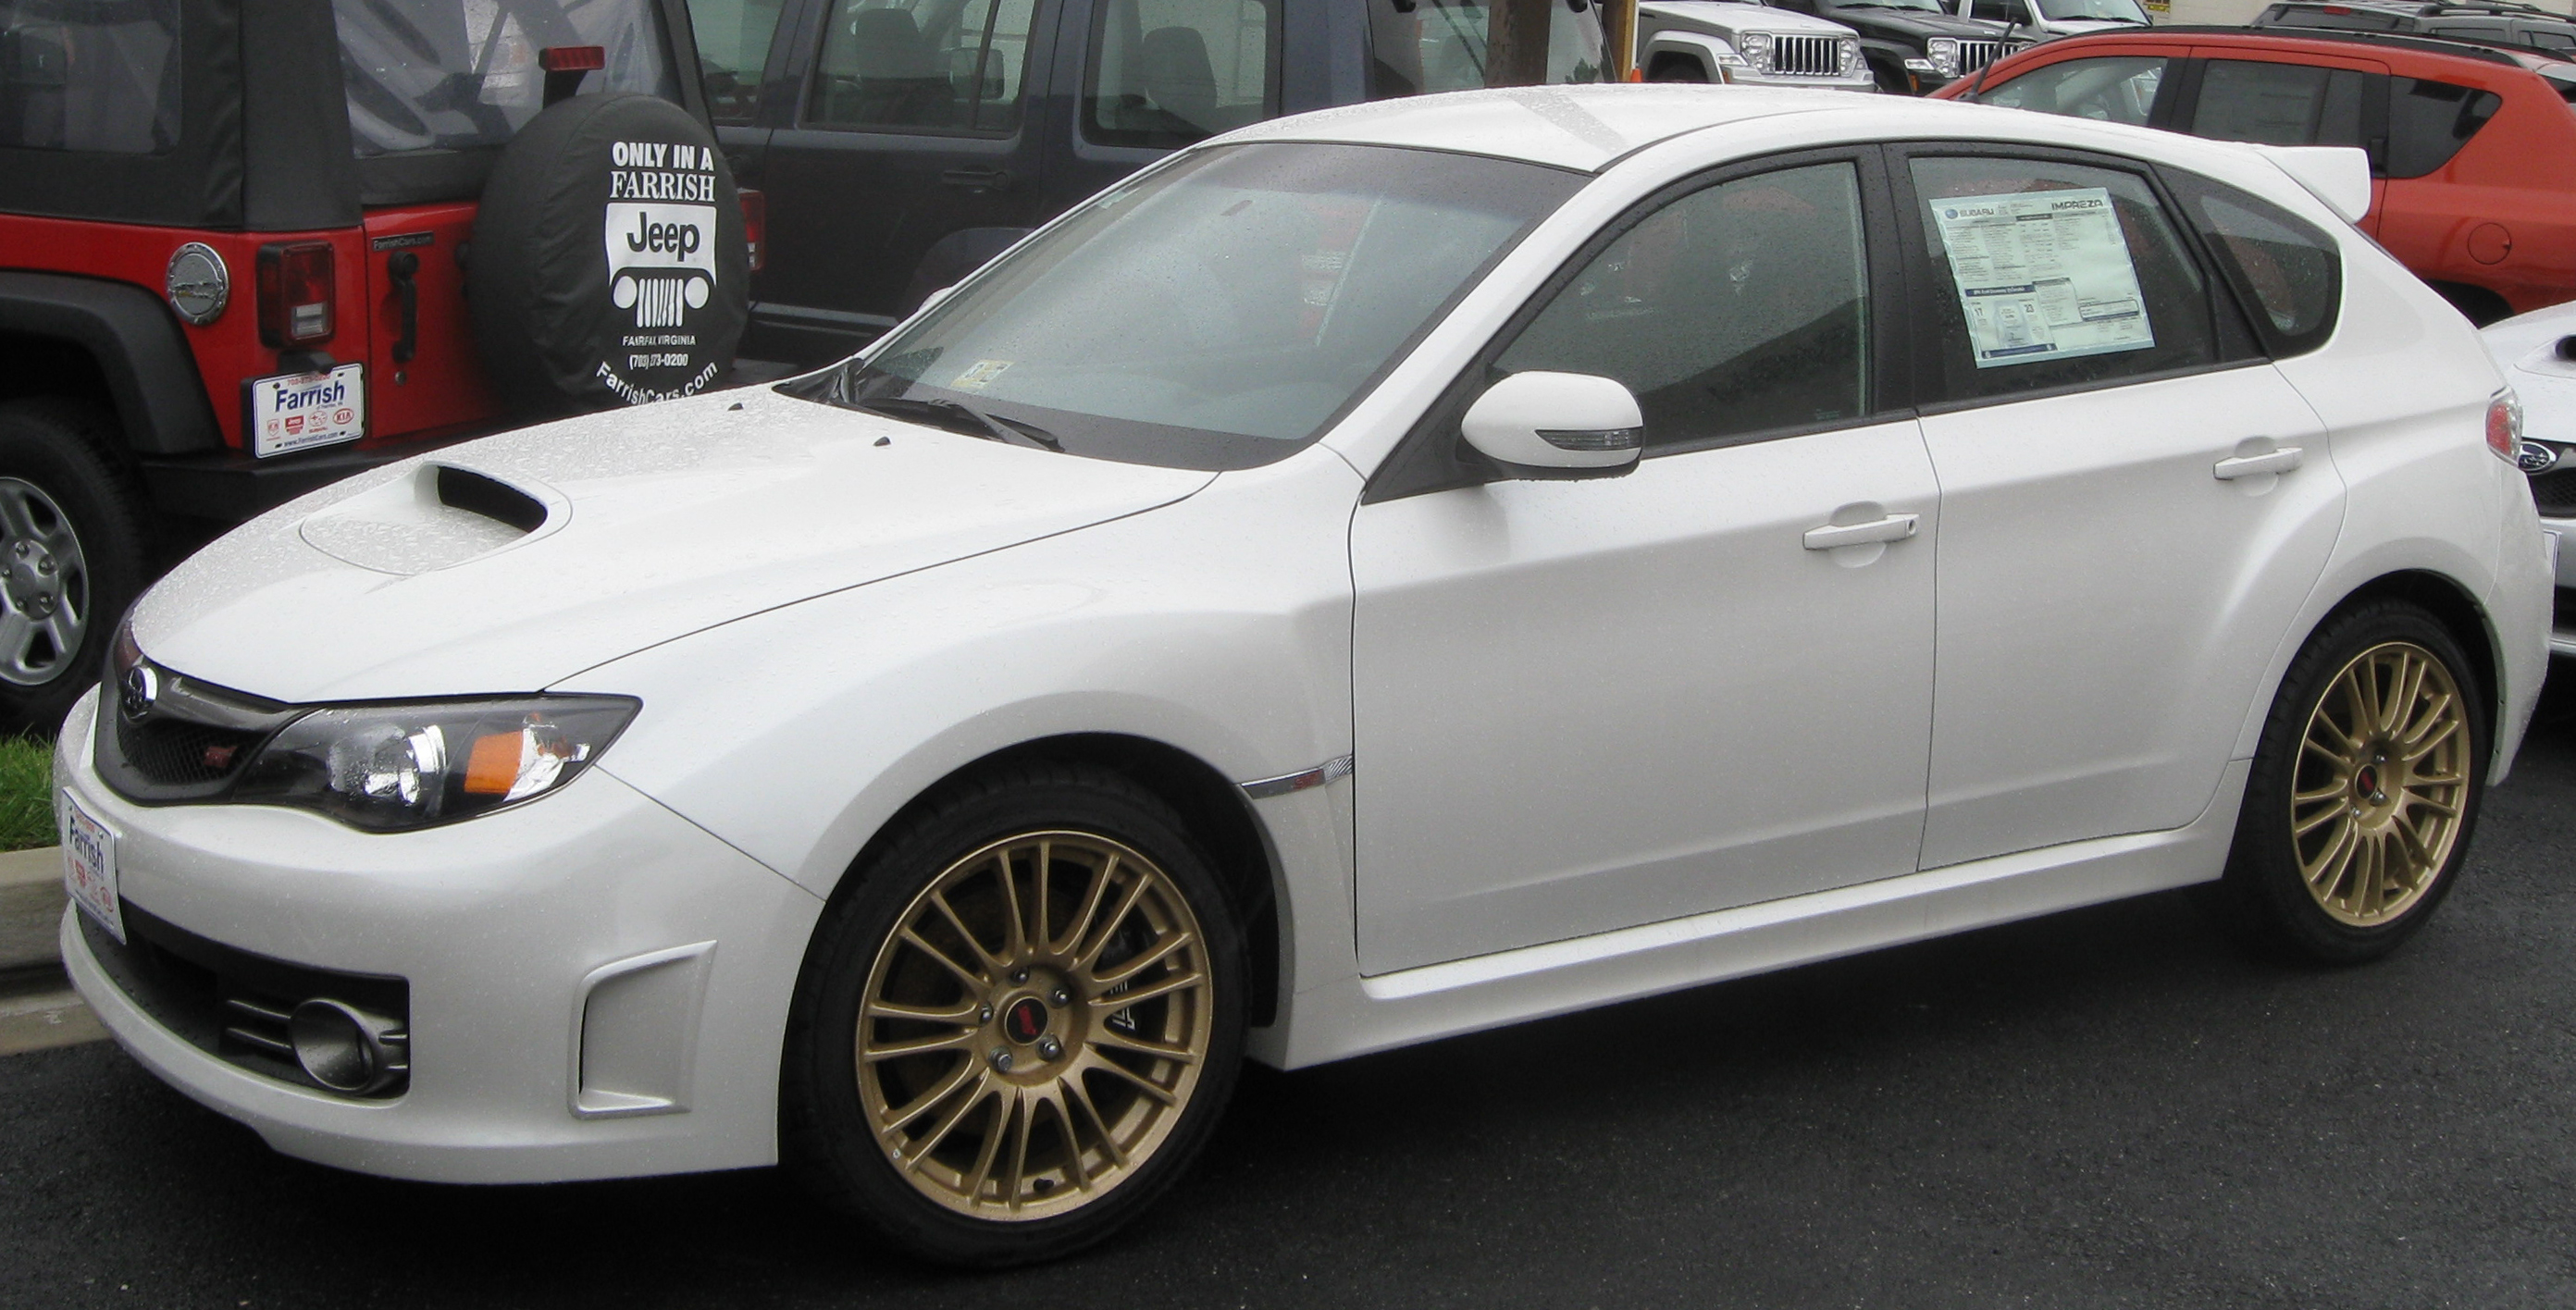 Subaru WRX 2009 Review, Amazing Pictures and Images